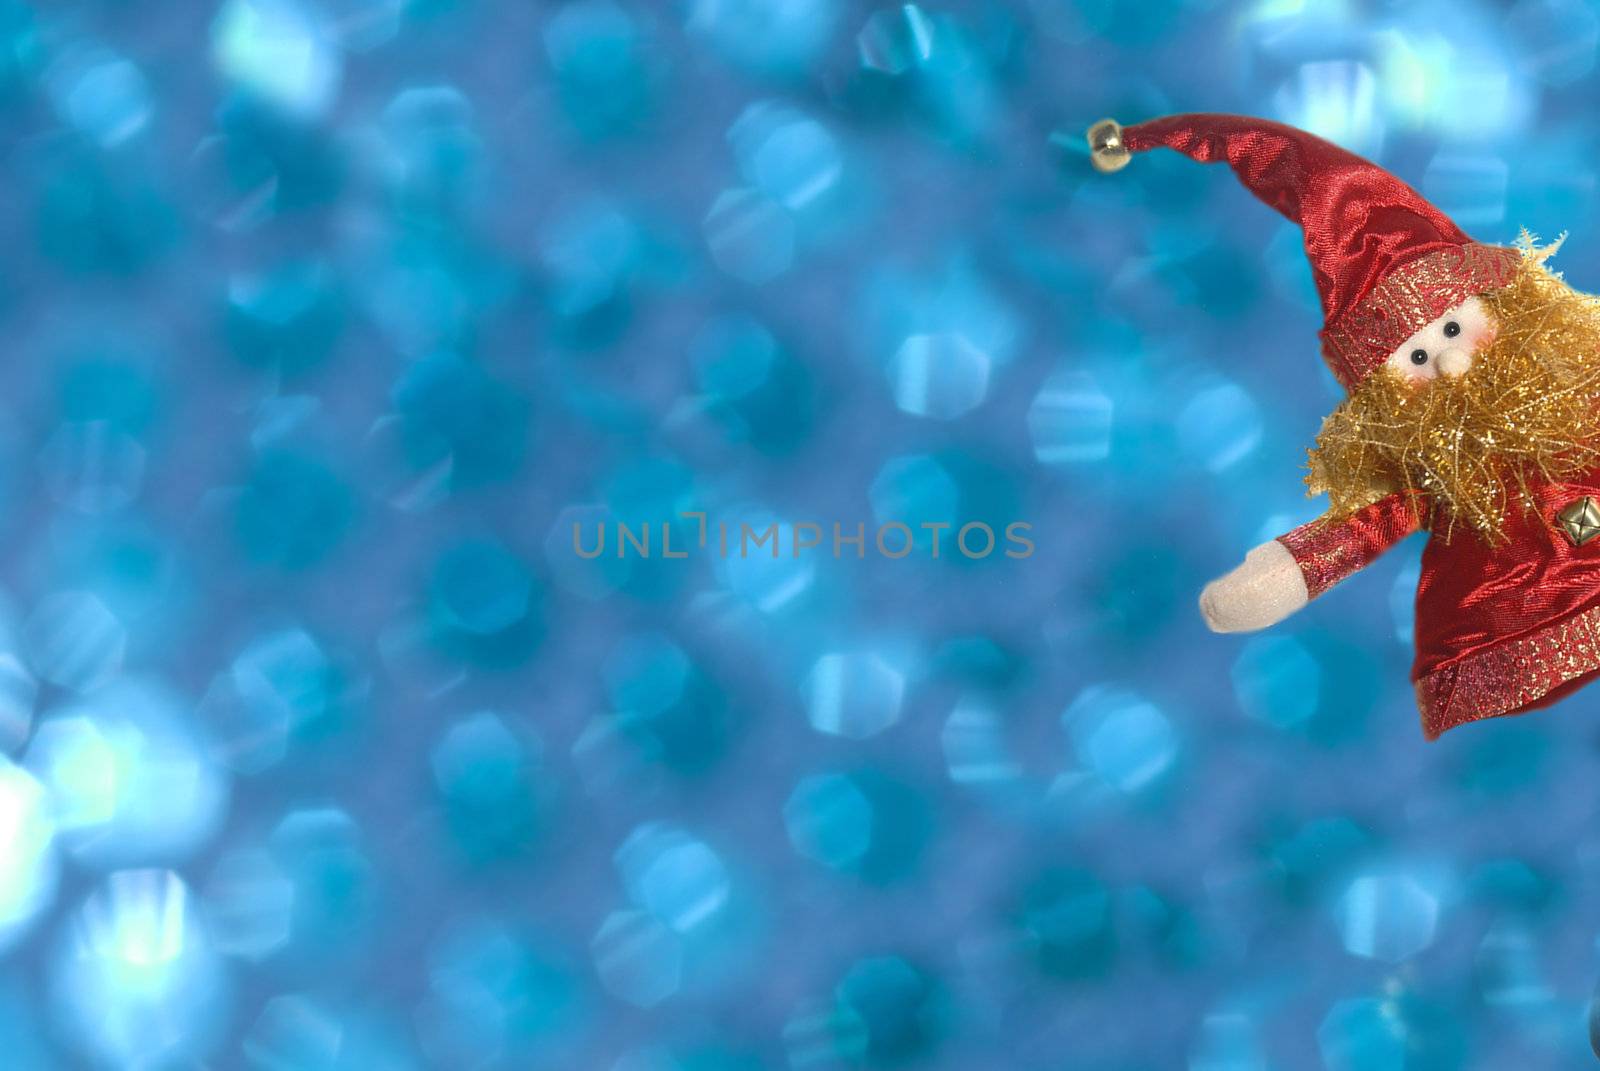 Funny Christmas elf on a blue background out of focus